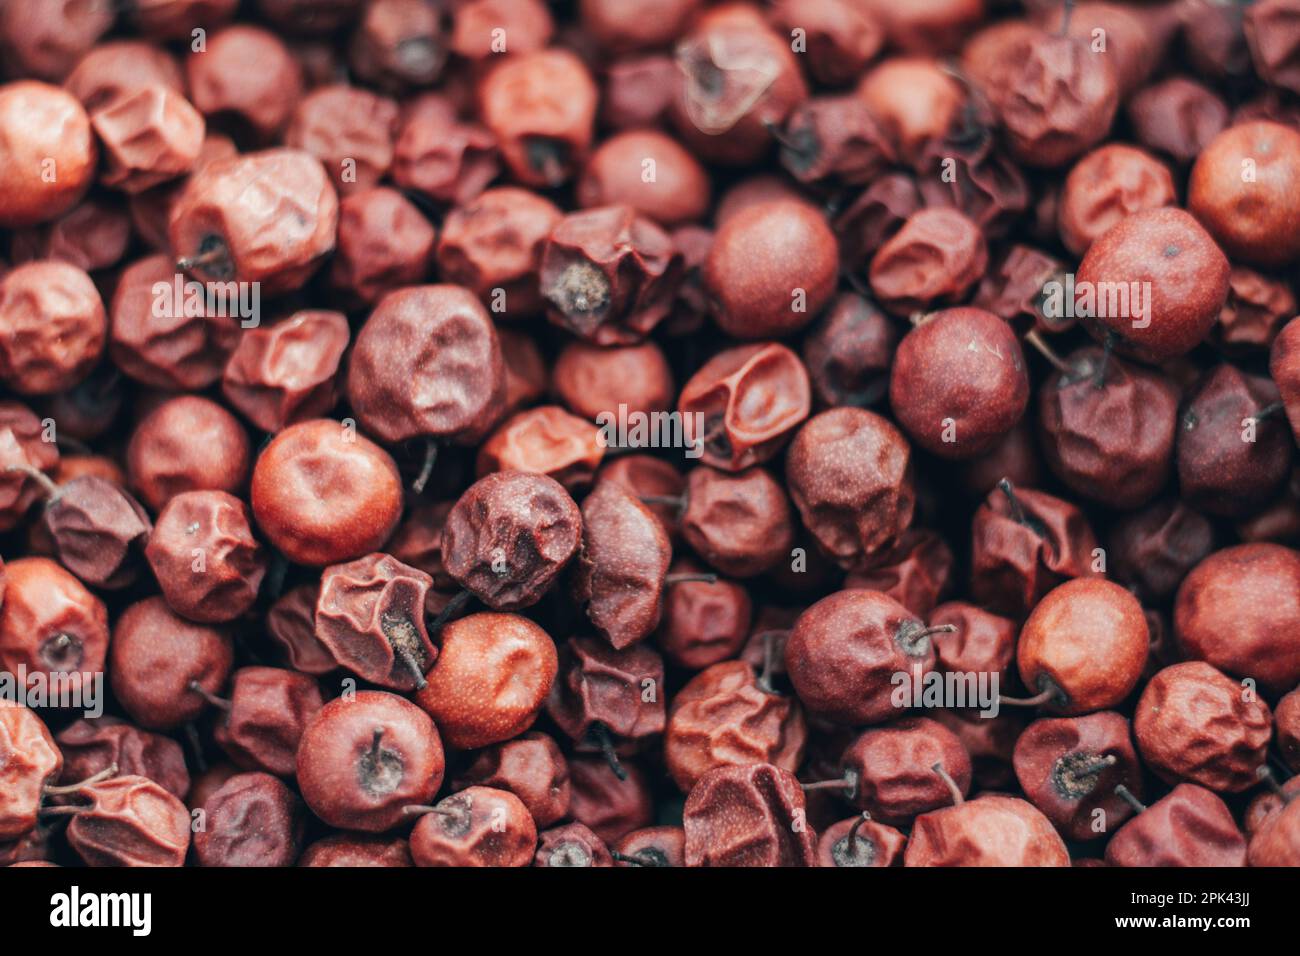 A close-up image of dried cranberries with some of the seeds still intact Stock Photo